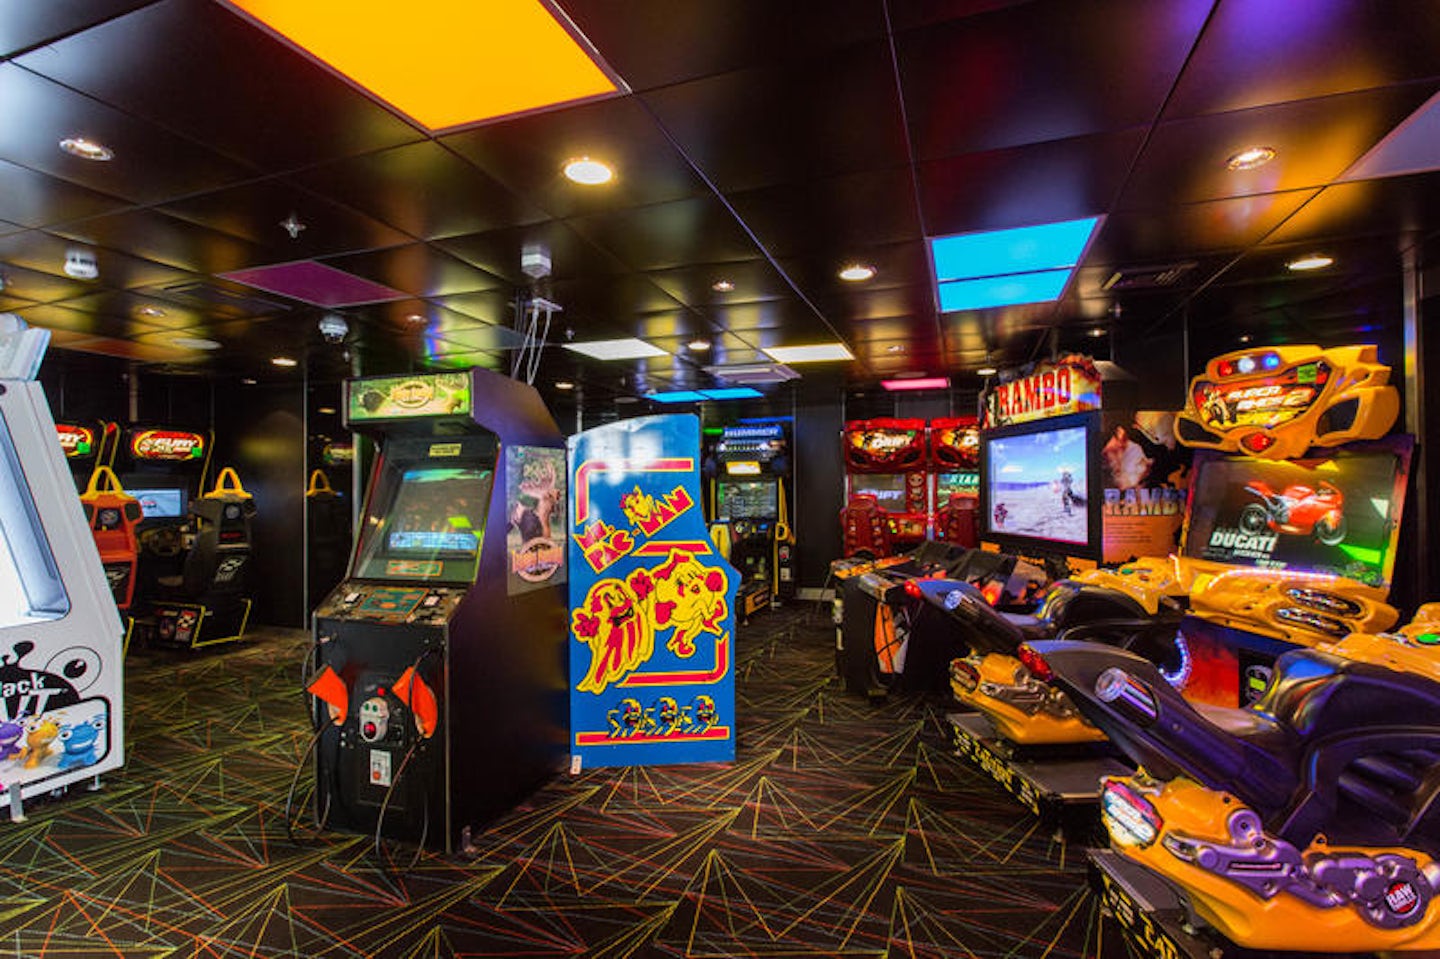 Challenger's Video Arcade on Radiance of the Seas